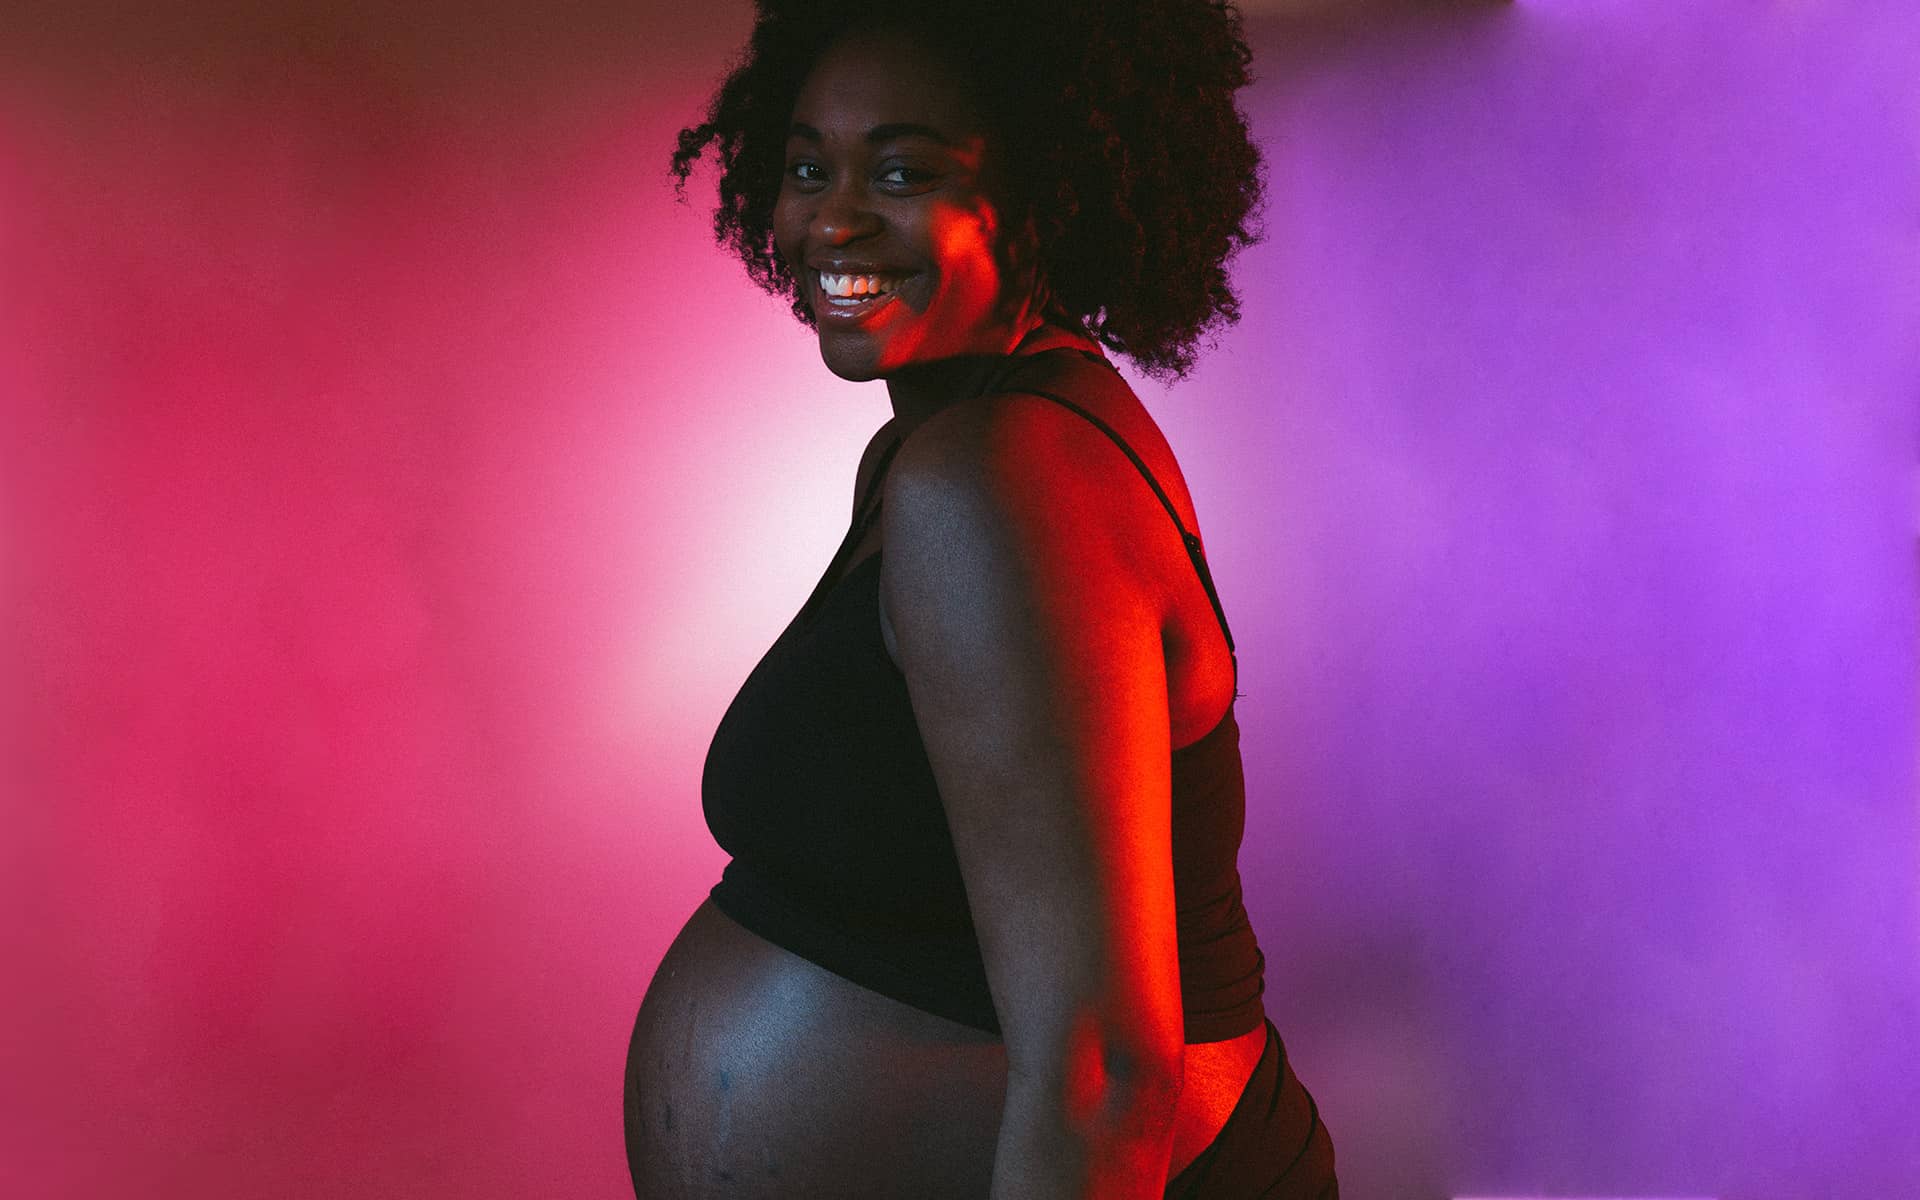 Heavily pregnant woman in front of a colourful backdrop